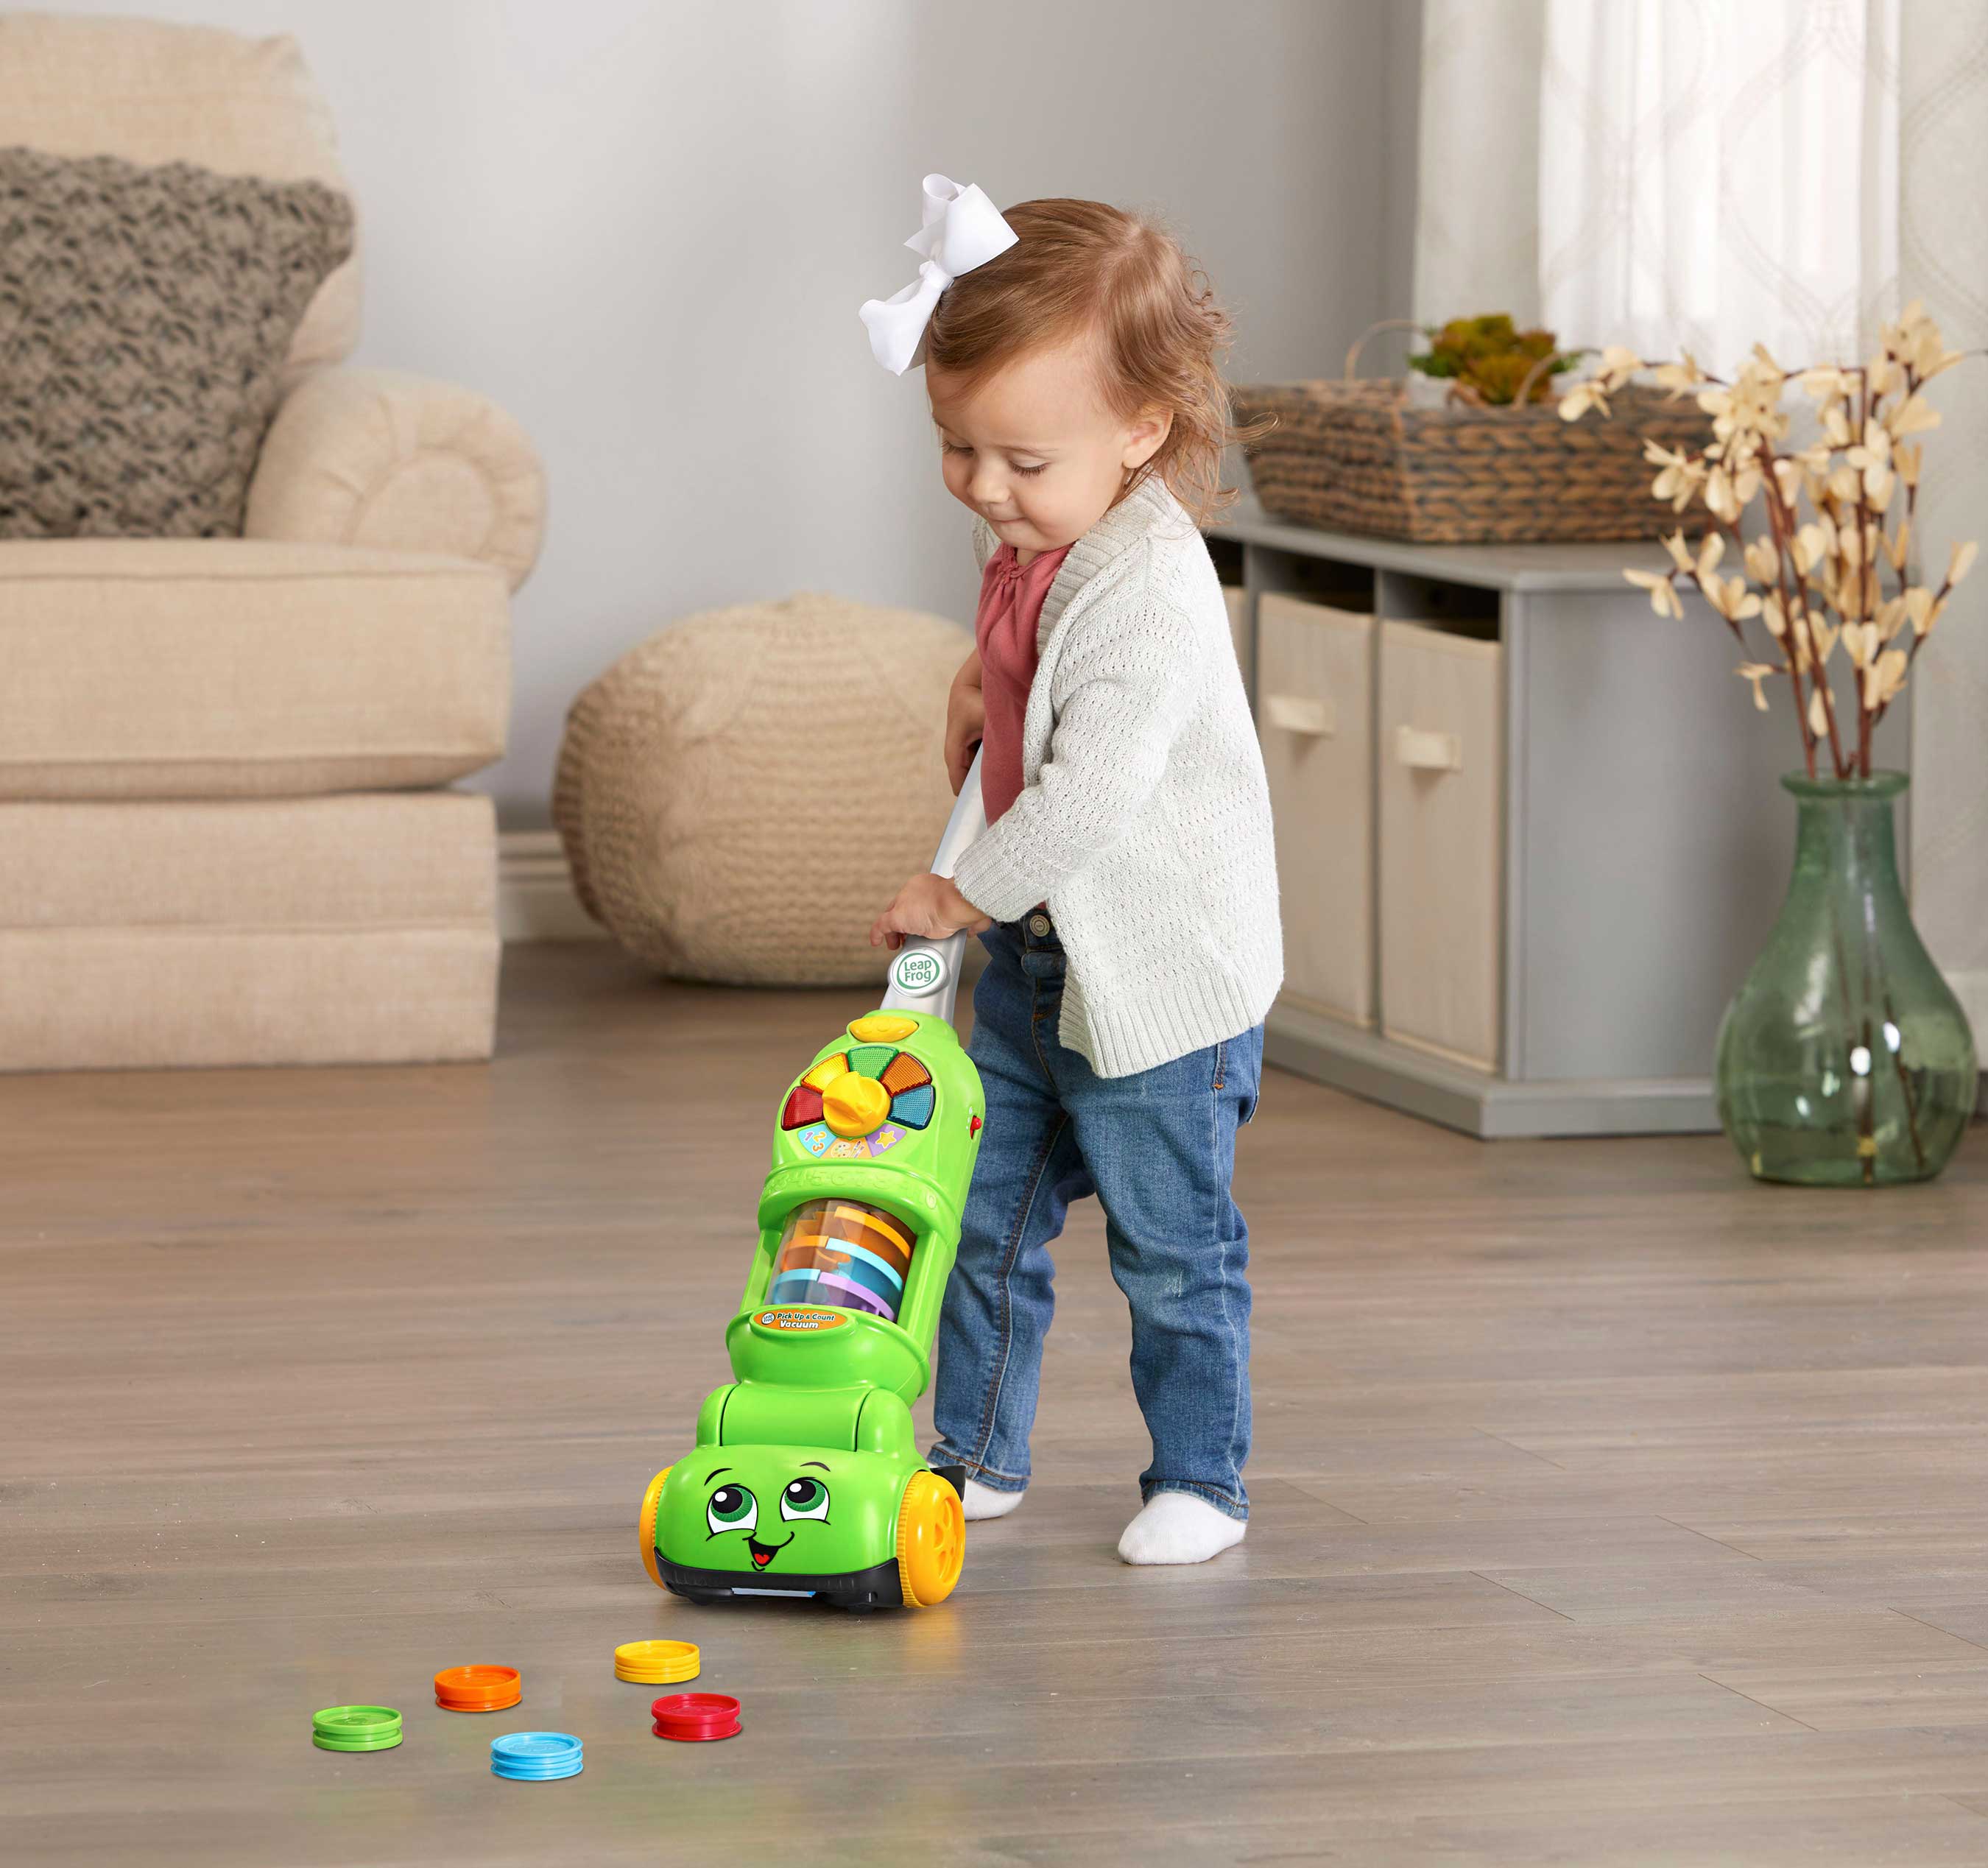 LeapFrog® introduces new infant and preschool learning toys, such as the Pick Up & Count Vacuum™.